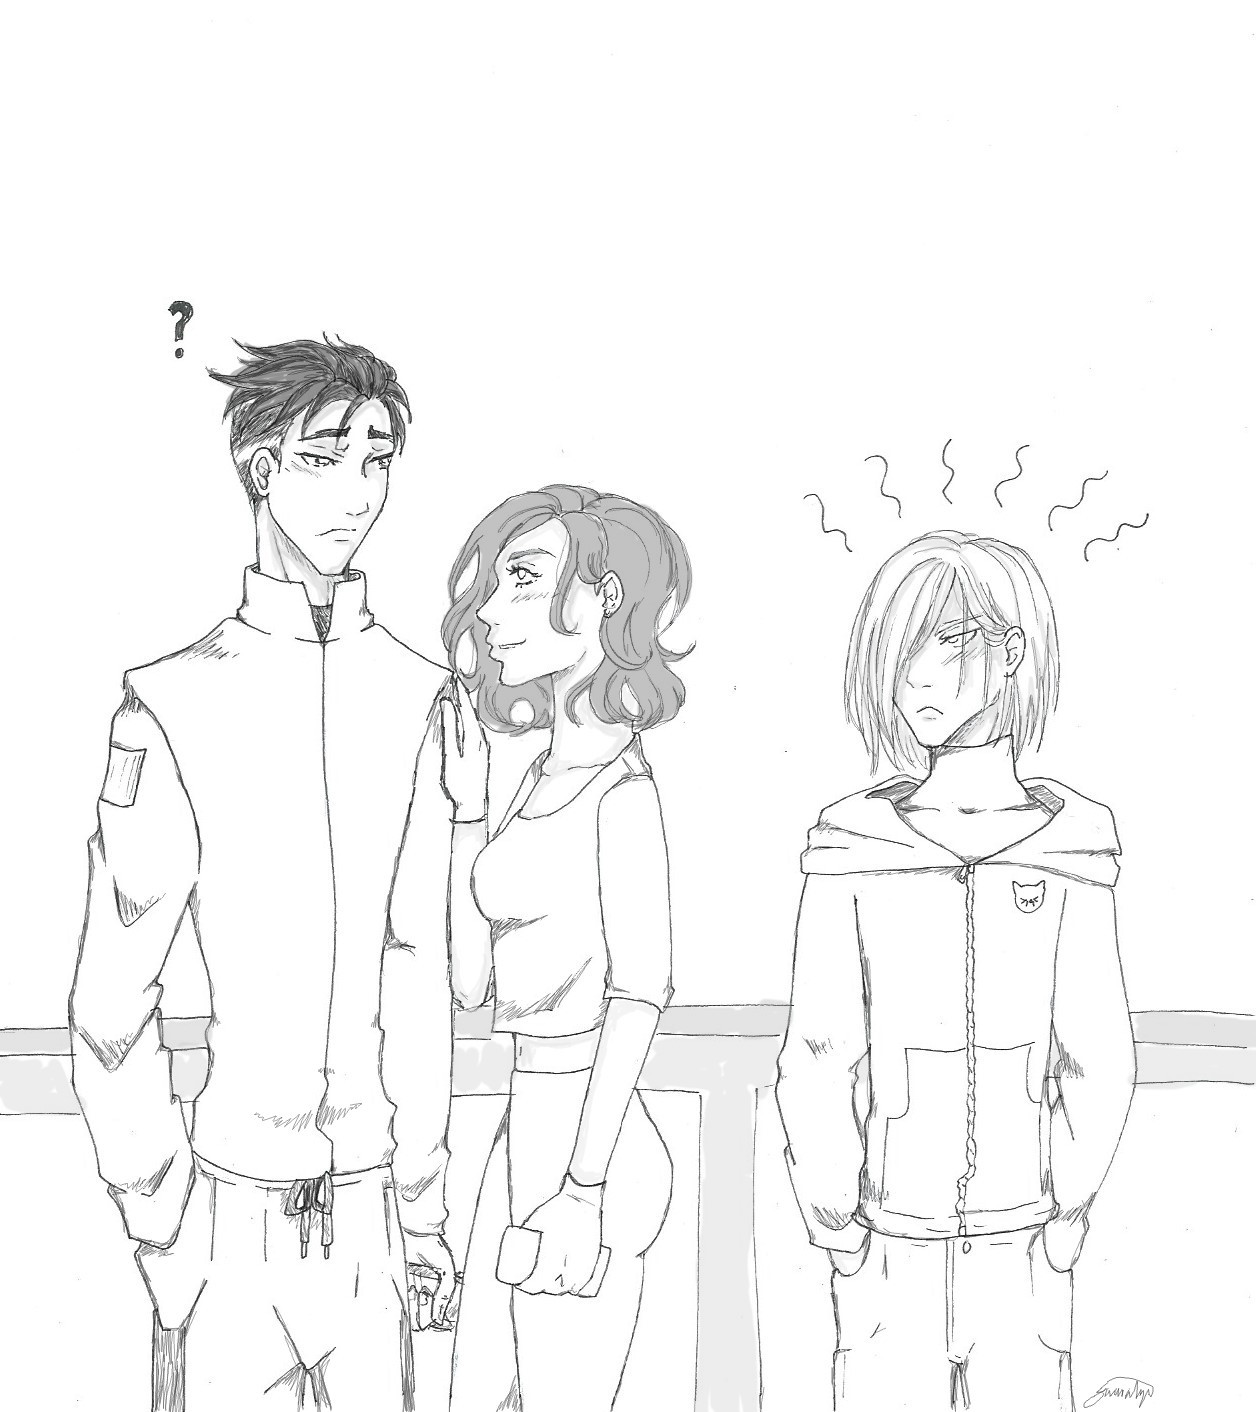 Poor beka is so busy worrying why Yuri is giving him the stink eye, he doesn’t even notice Mila is flirting with him. Yura is jealous about his beka..
(I really like Mila and find it interesting that she might be into Otabek, but I personally do...